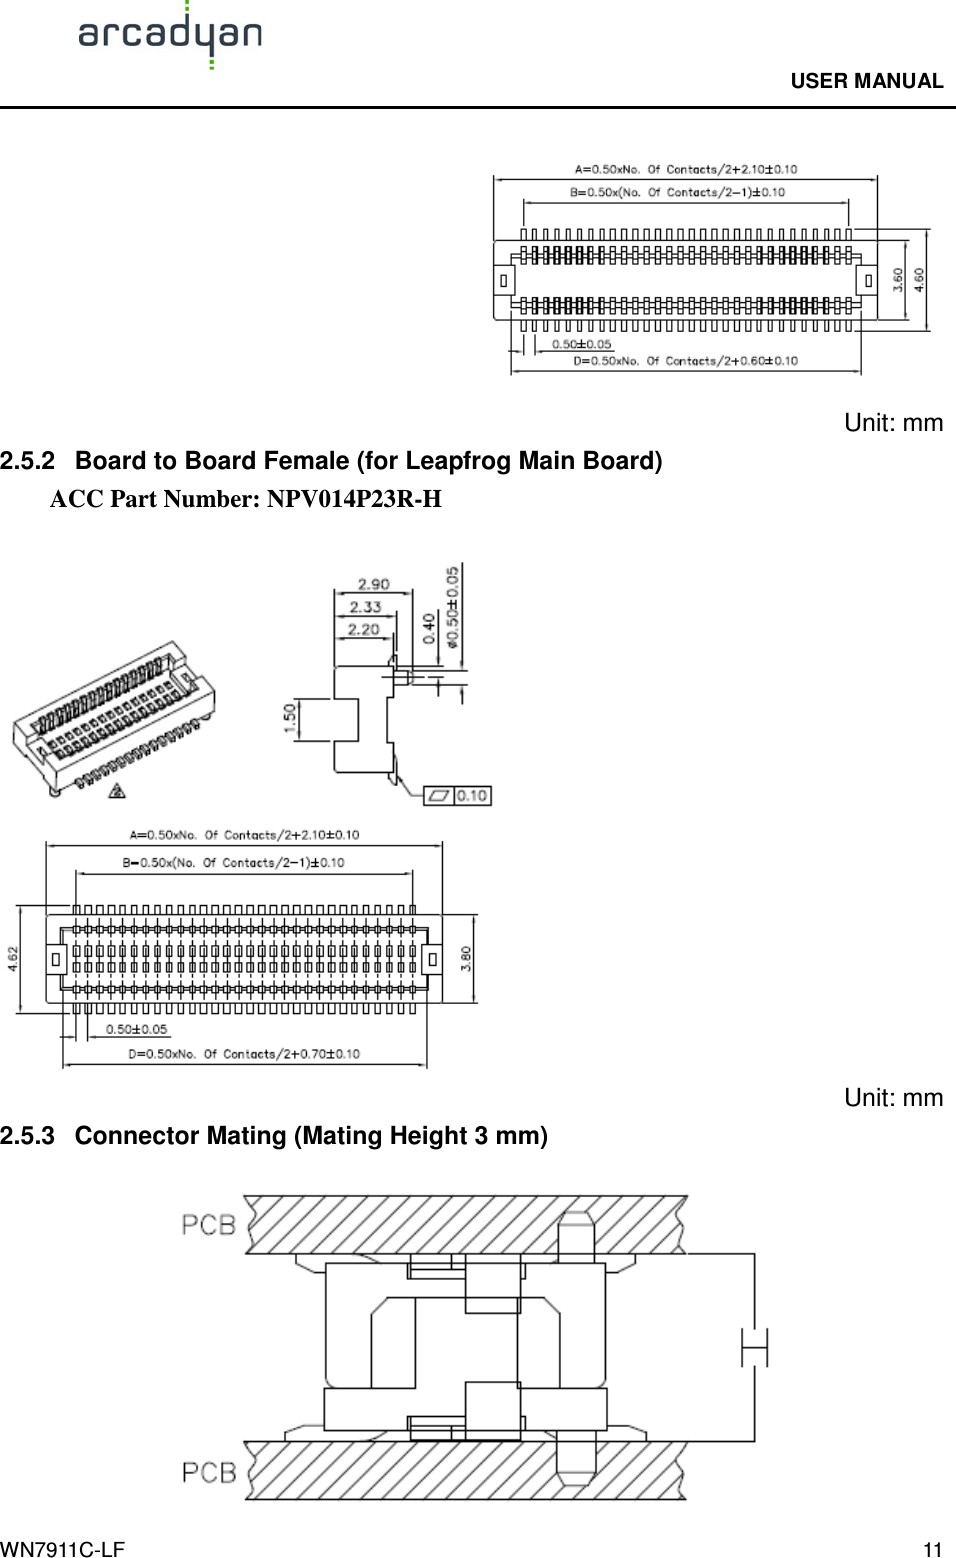                                              USER MANUAL                                              WN7911C-LF  11  Unit: mm 2.5.2  Board to Board Female (for Leapfrog Main Board) ACC Part Number: NPV014P23R-H         Unit: mm 2.5.3  Connector Mating (Mating Height 3 mm)  